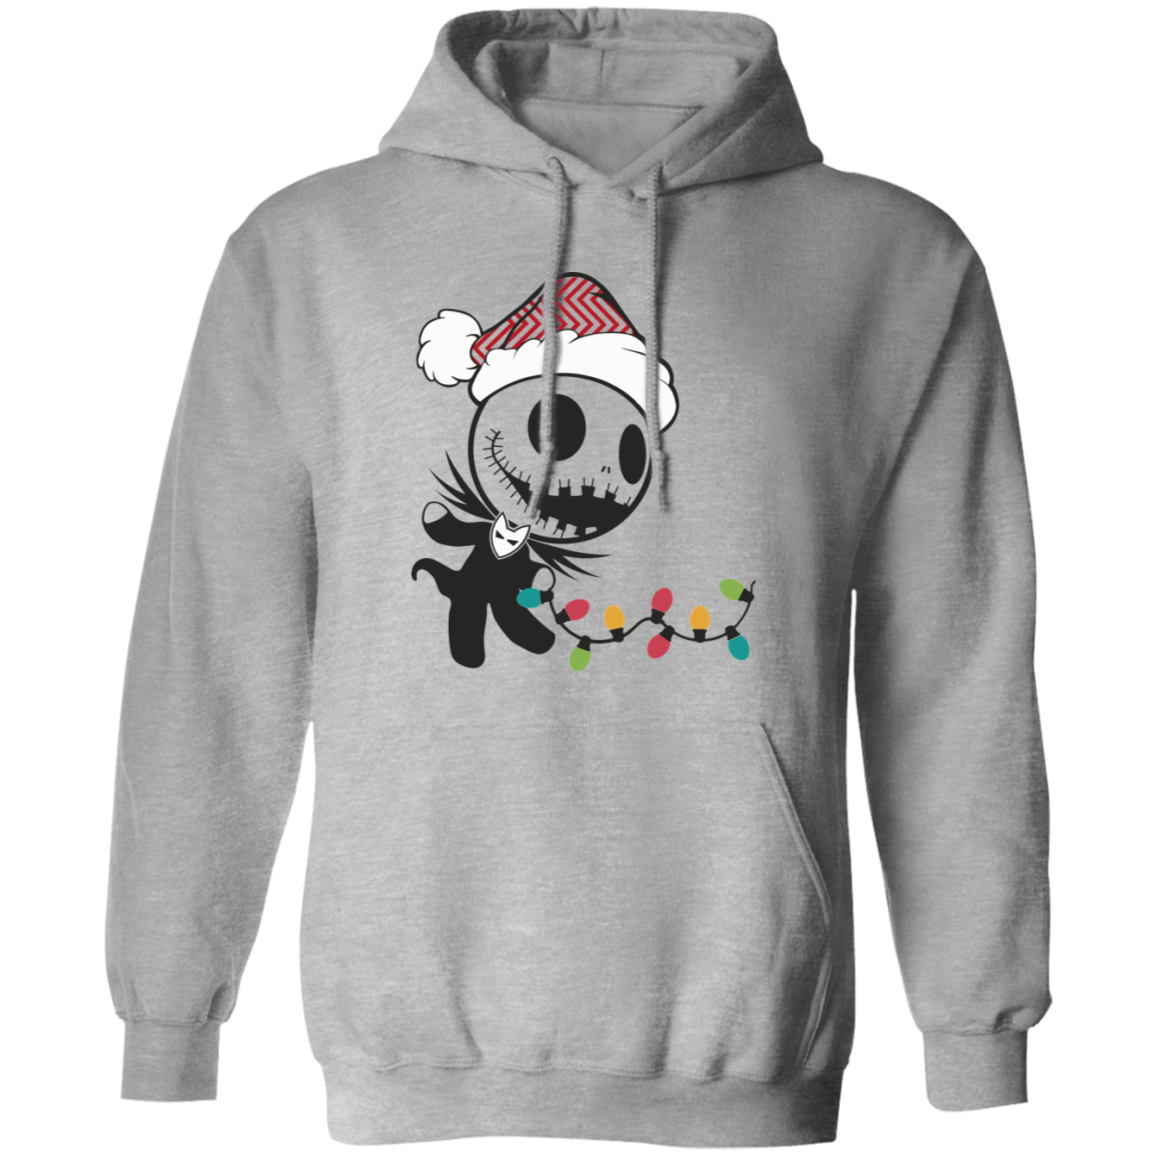 NBC Pullover Hoodie